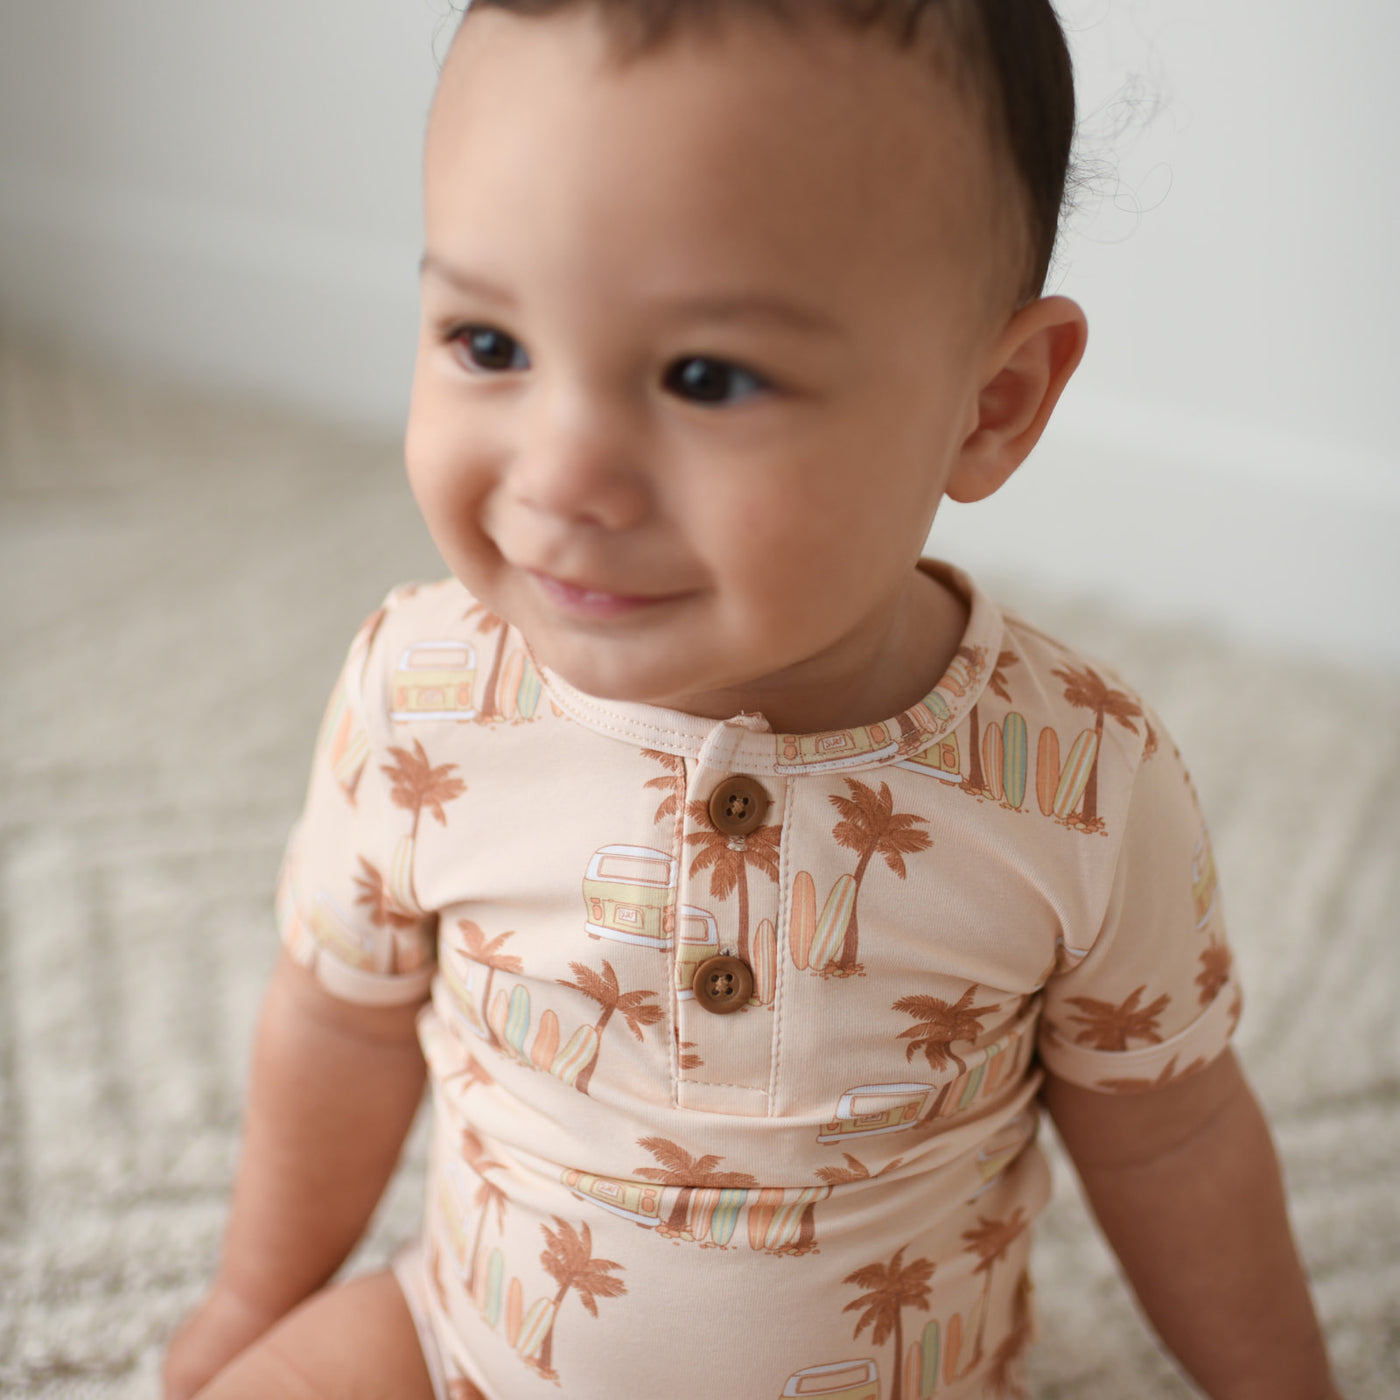 Waikiki short sleeve organic cotton unisex baby and toddler bodysuit with palm trees, longboard surfboards and combi wagon / van in an earthy colour palette.